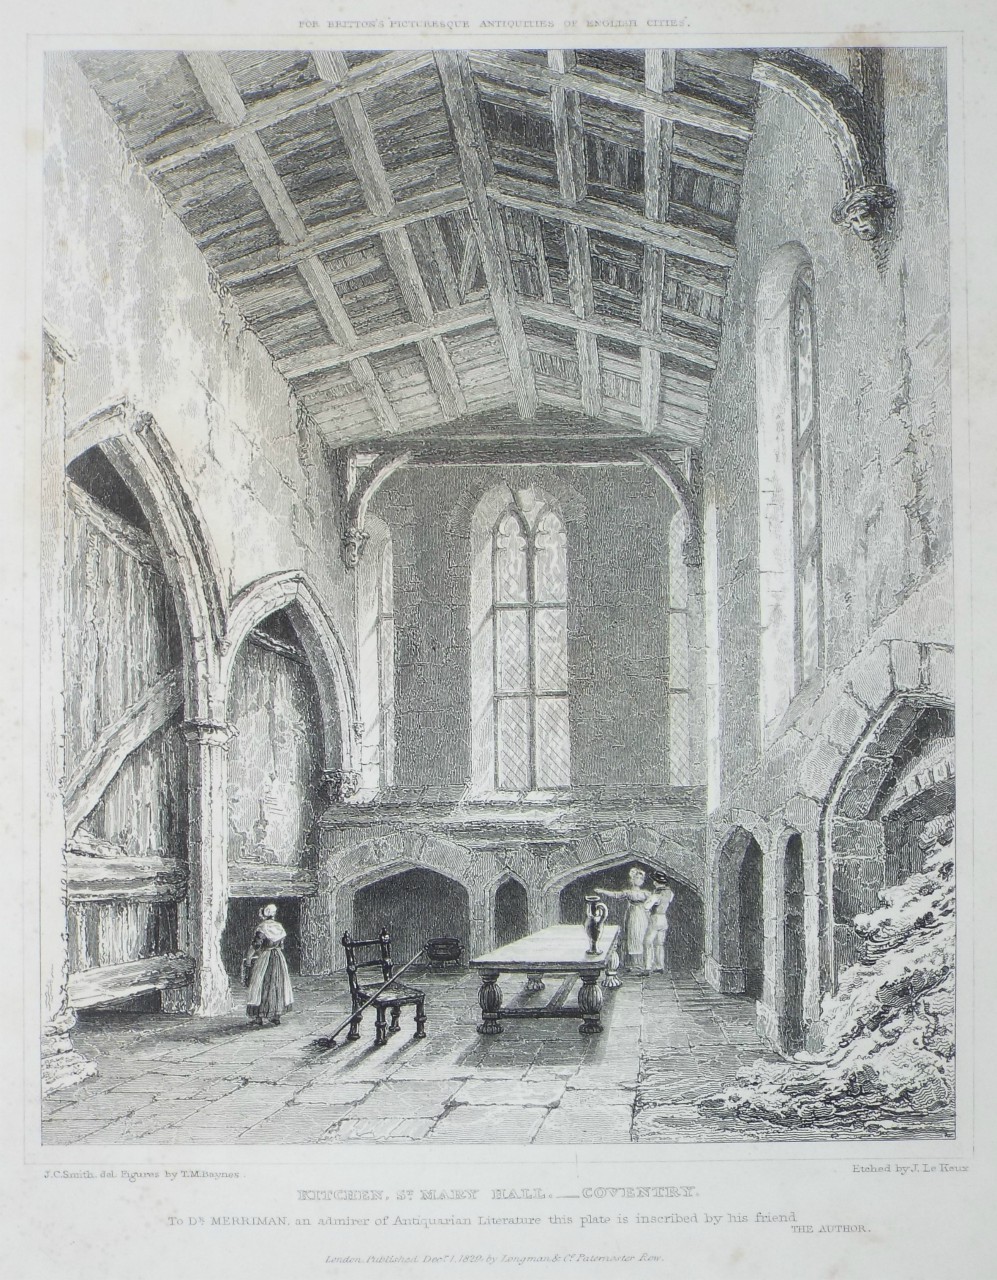 Print - Kitchen, St. Mary Hall. Coventry. - Le